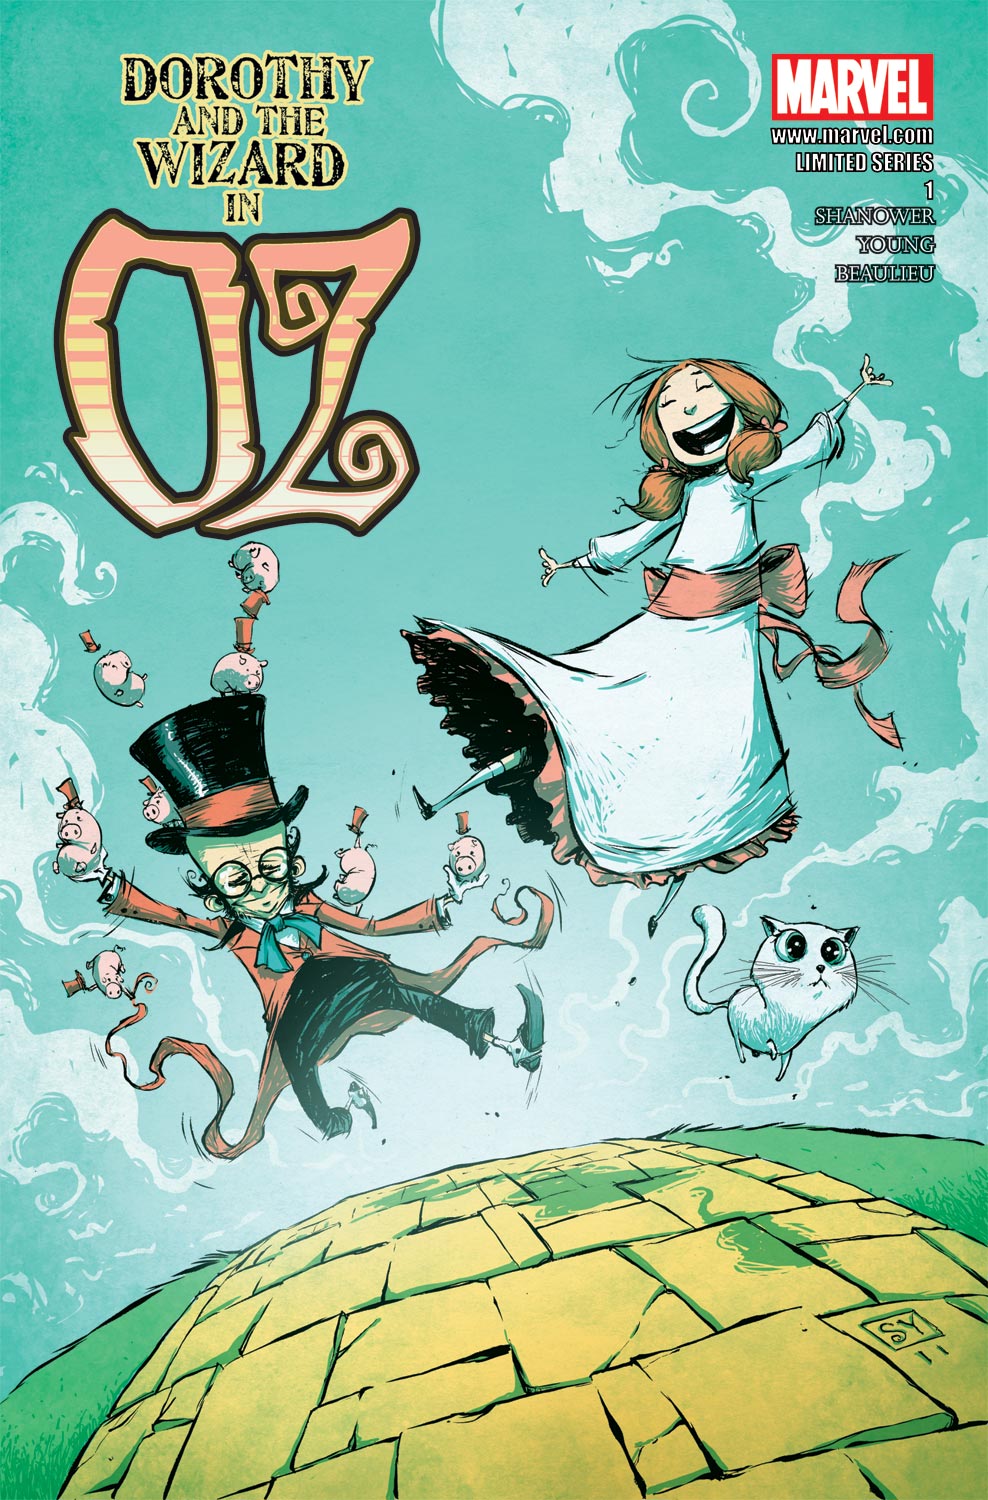 Dorothy & the Wizard in Oz (2011) #1